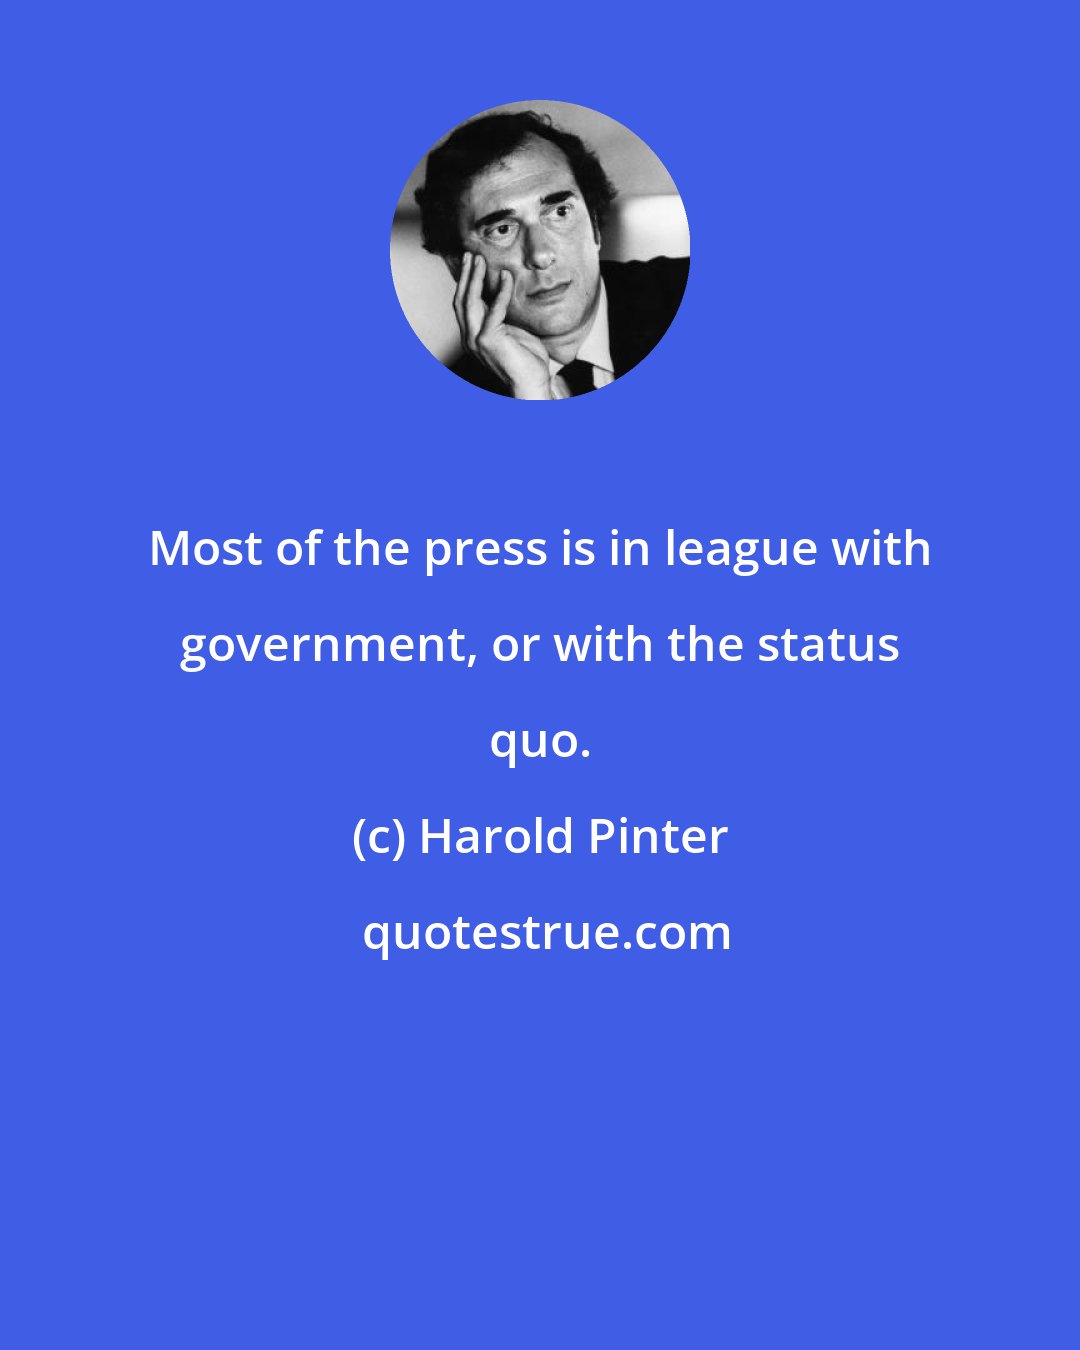 Harold Pinter: Most of the press is in league with government, or with the status quo.